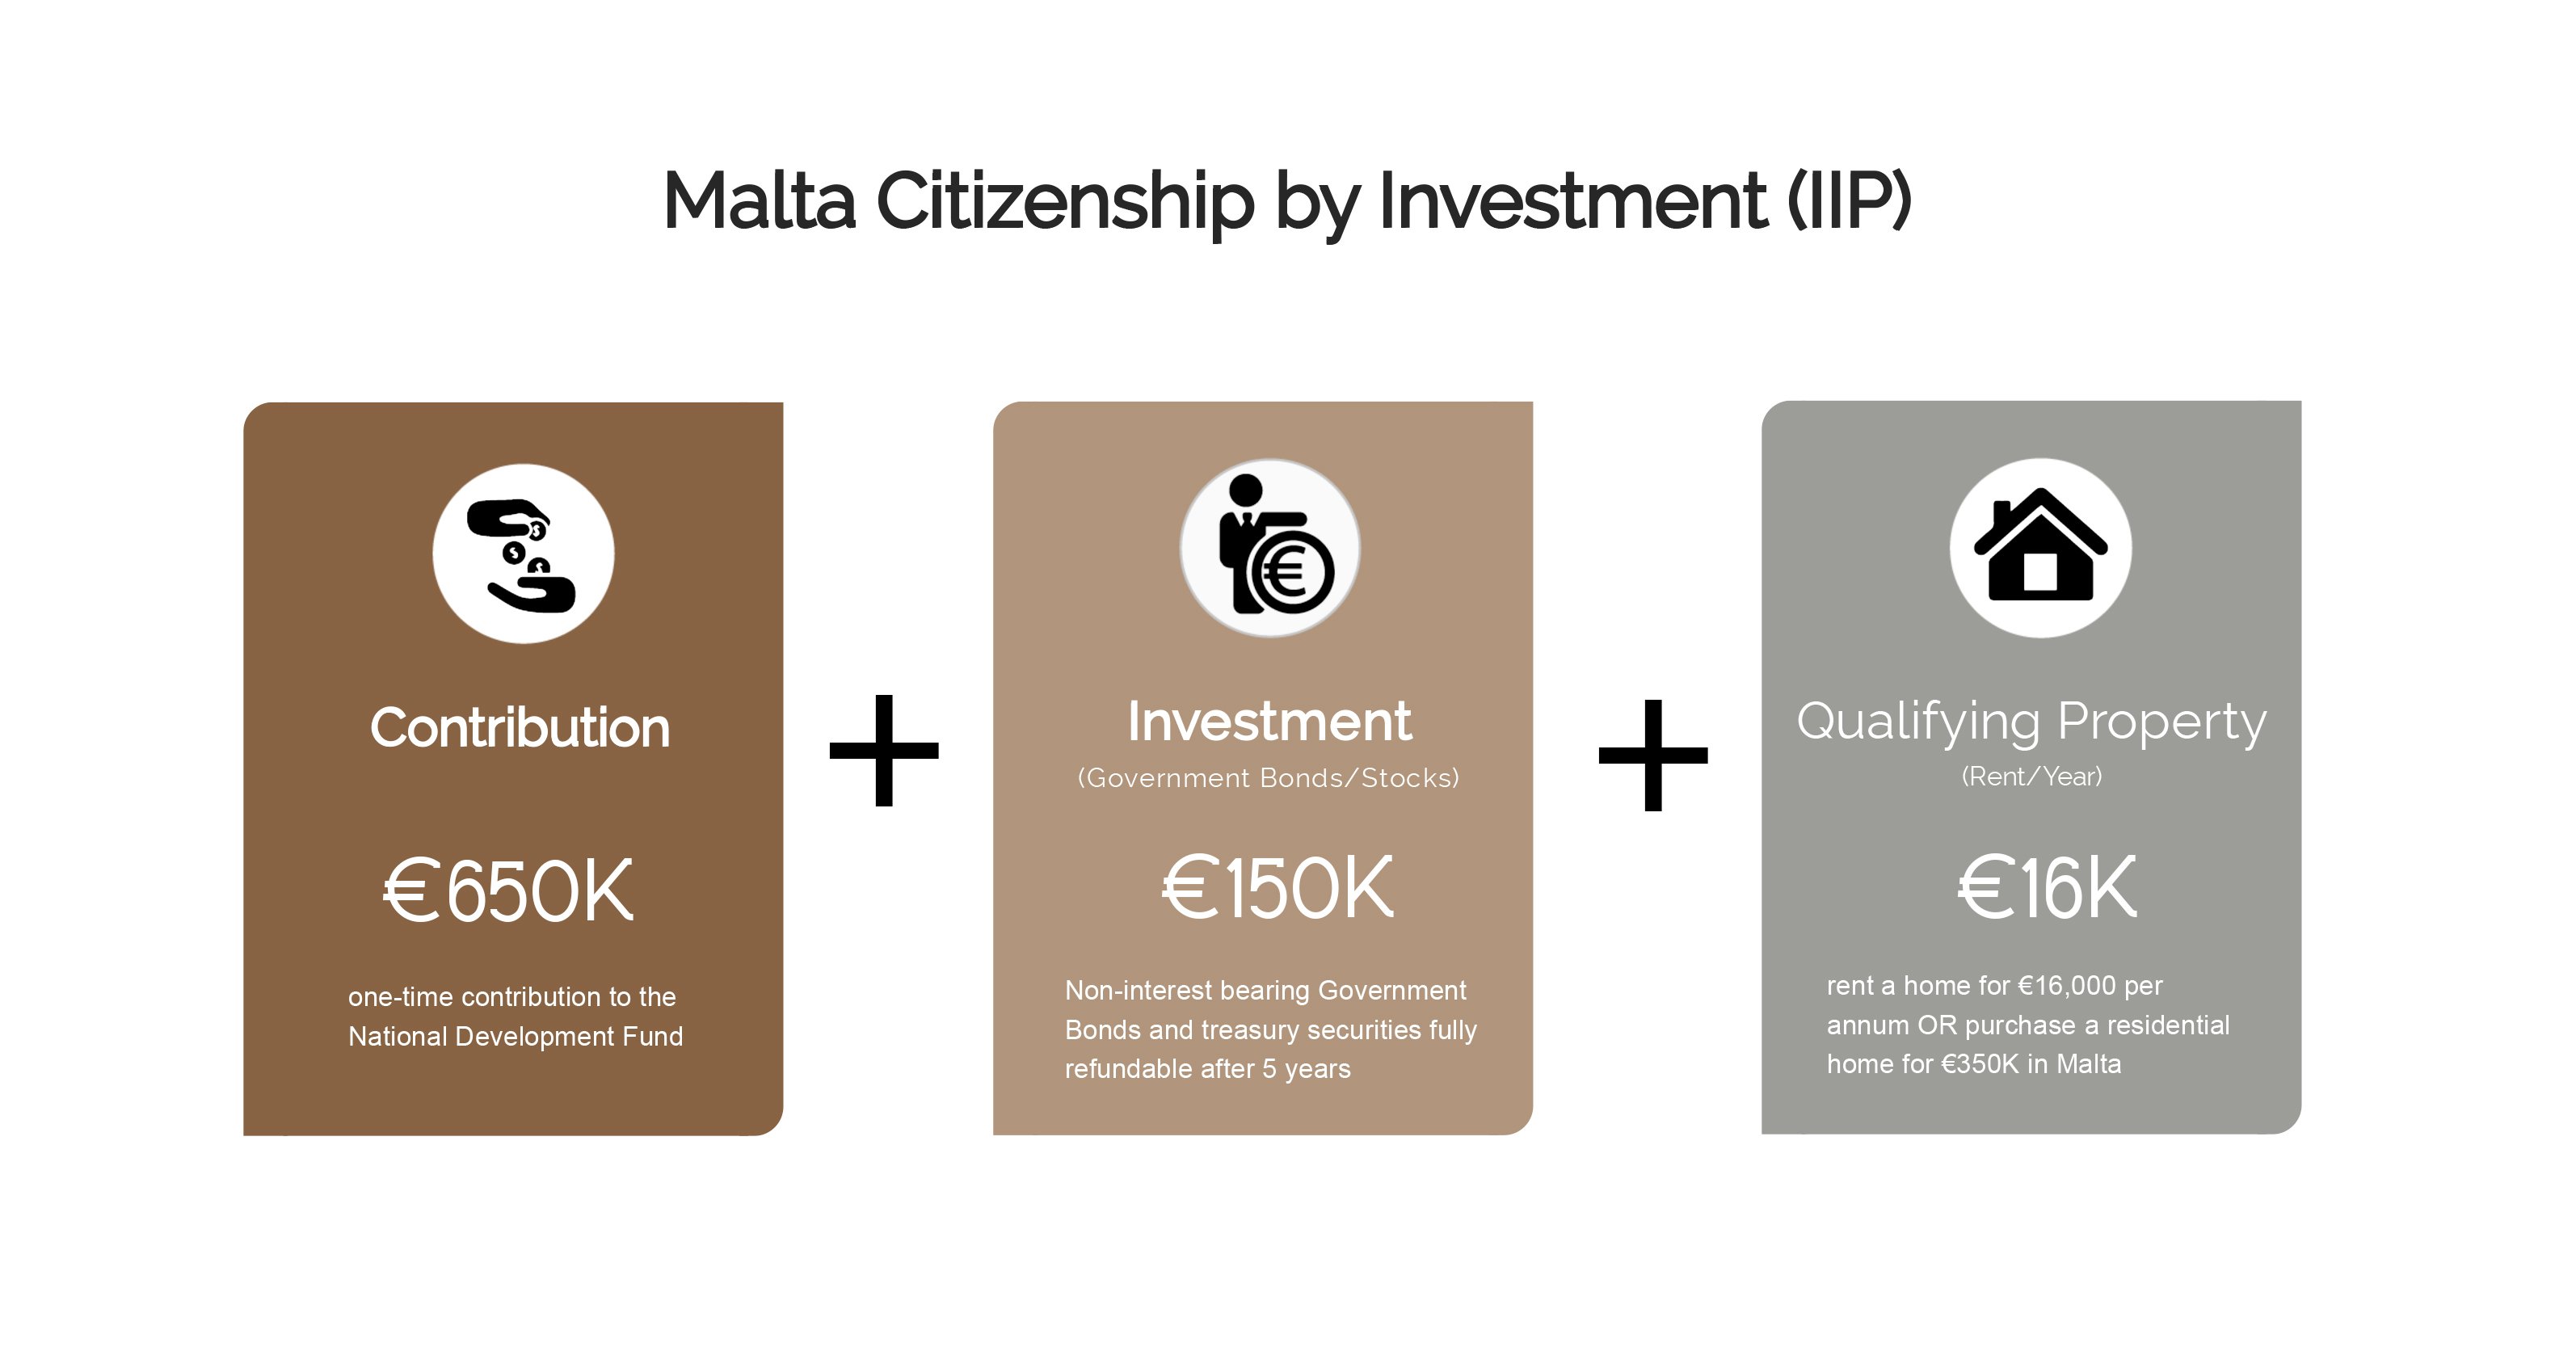 malta citizenship by investment cost